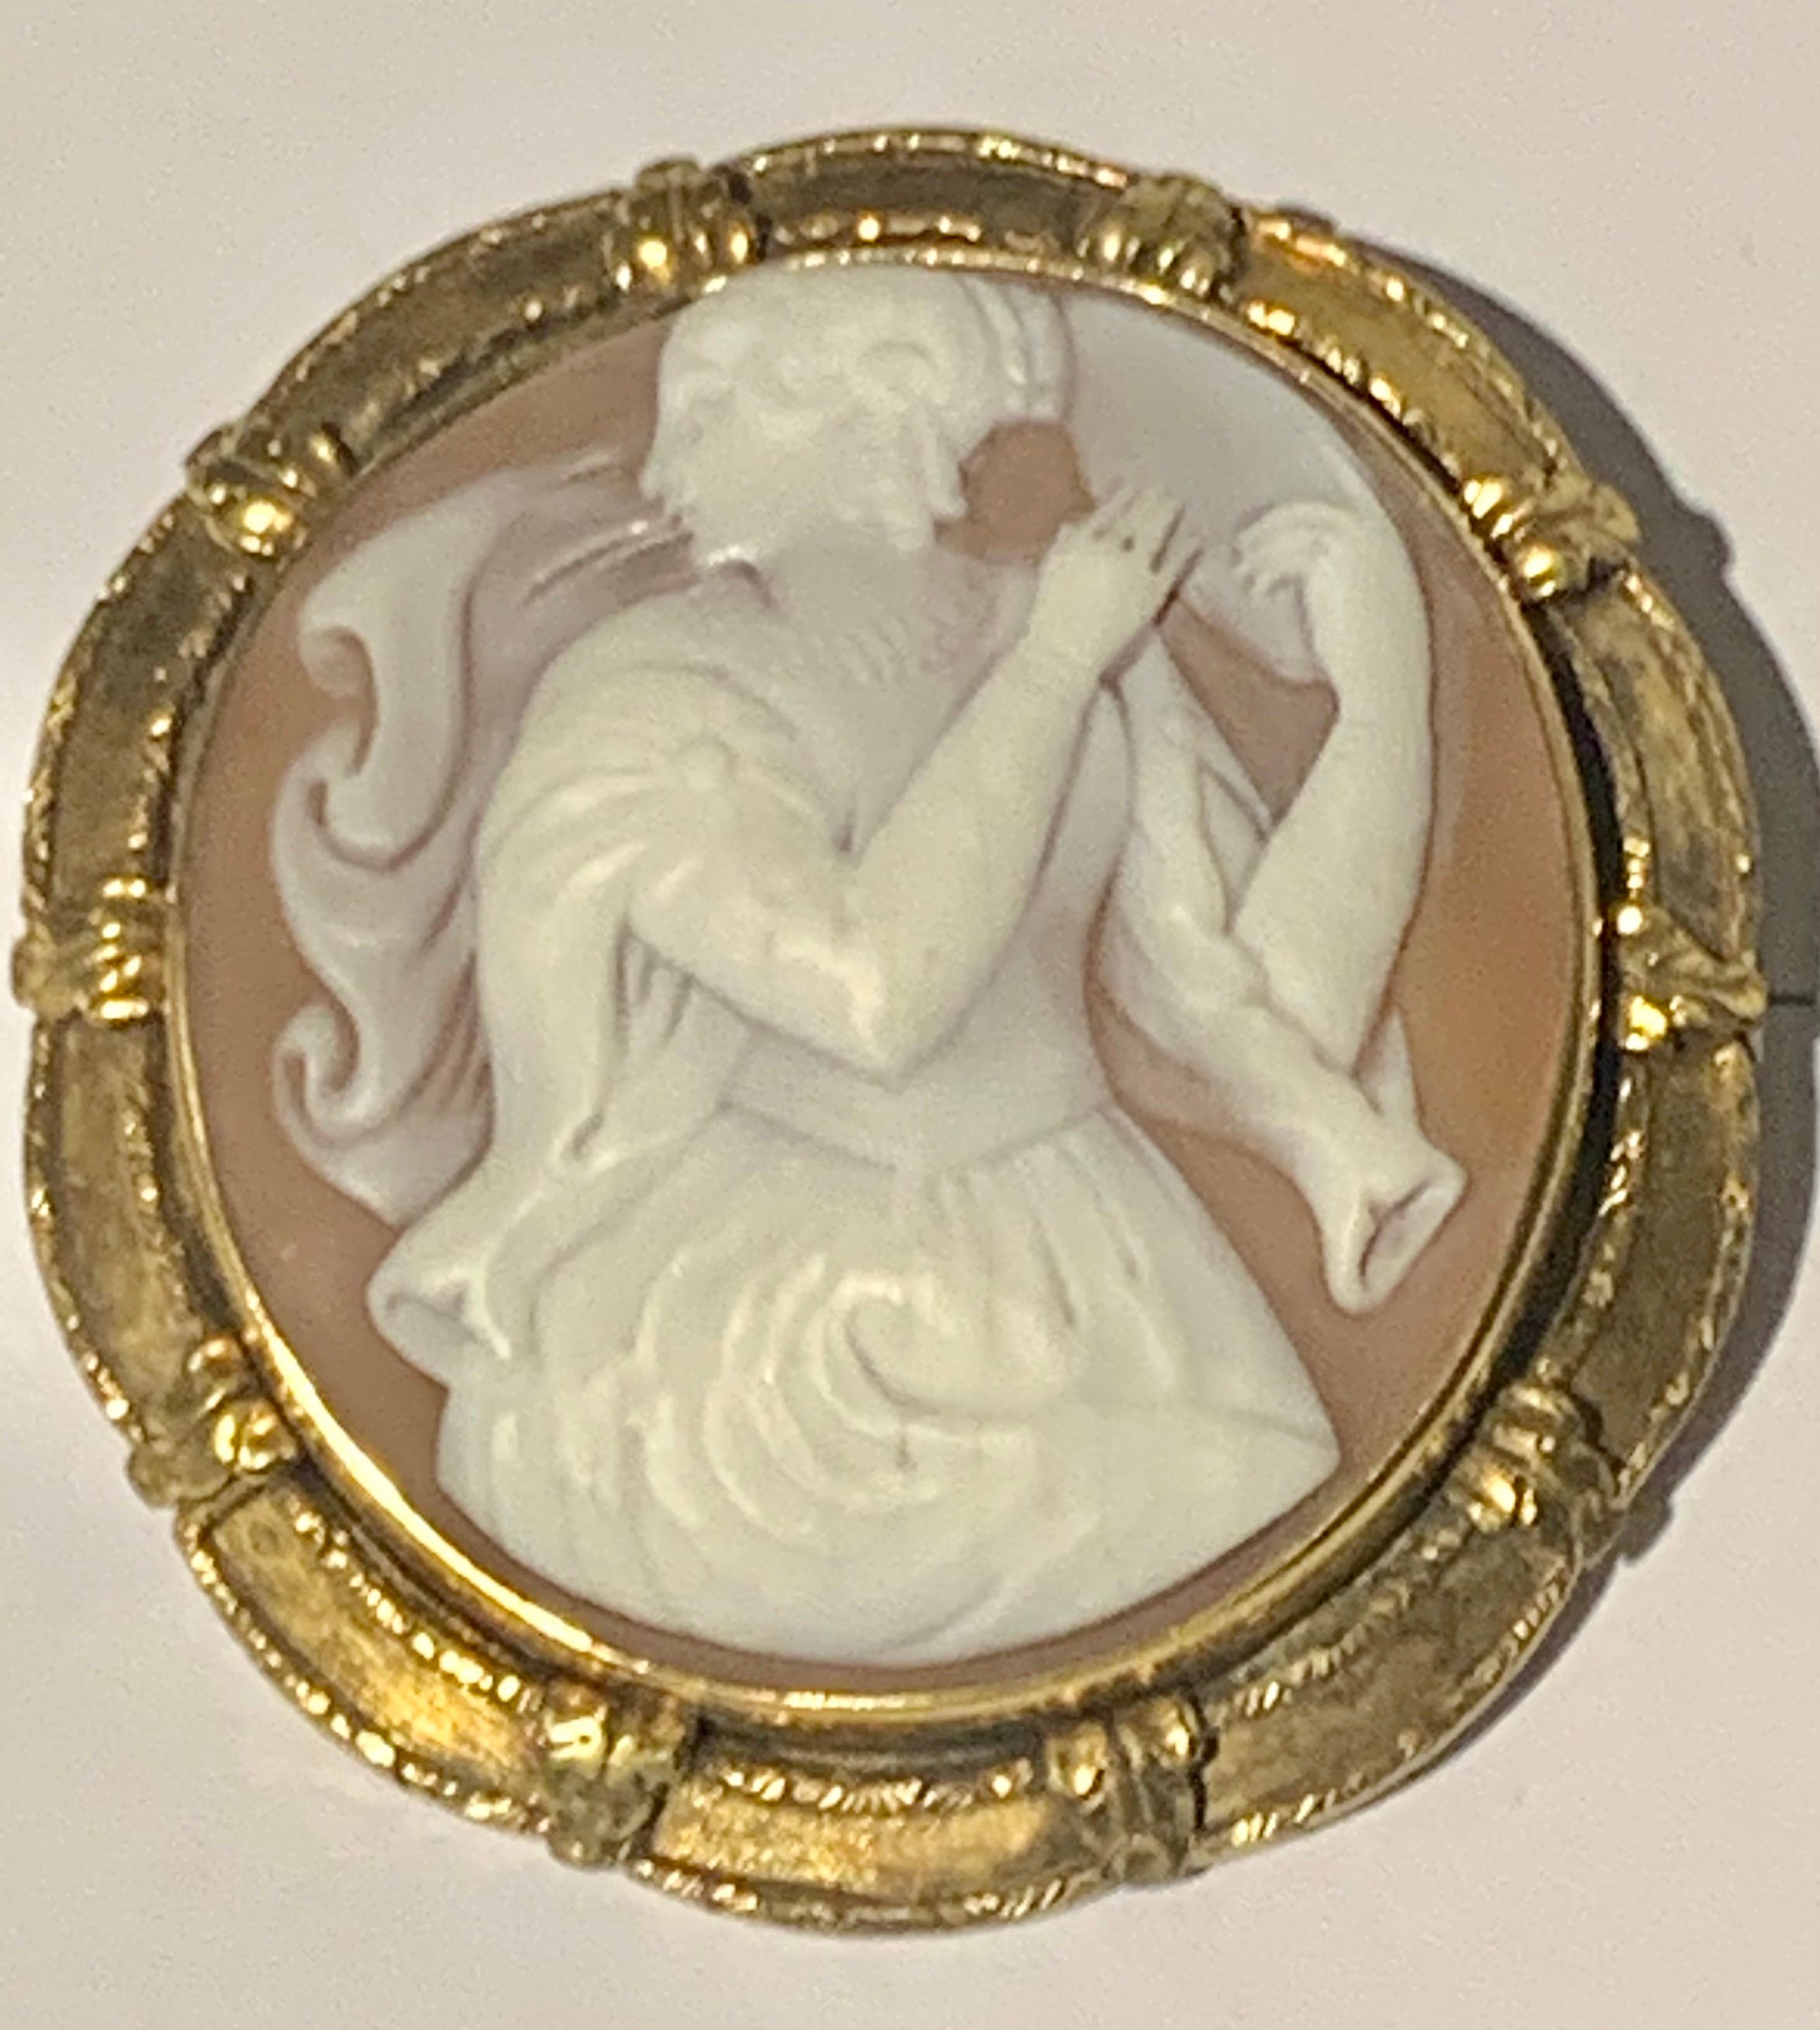 A Large Victorian cameo brooch Hand crafted in 15ct gold. this fine quality Victorian superb Cameo is carved from shell and is of a beautiful lady.. It is mounted in a magnificent15 carat solid gold frame The closure is a pin and hook. Weight: 17.5